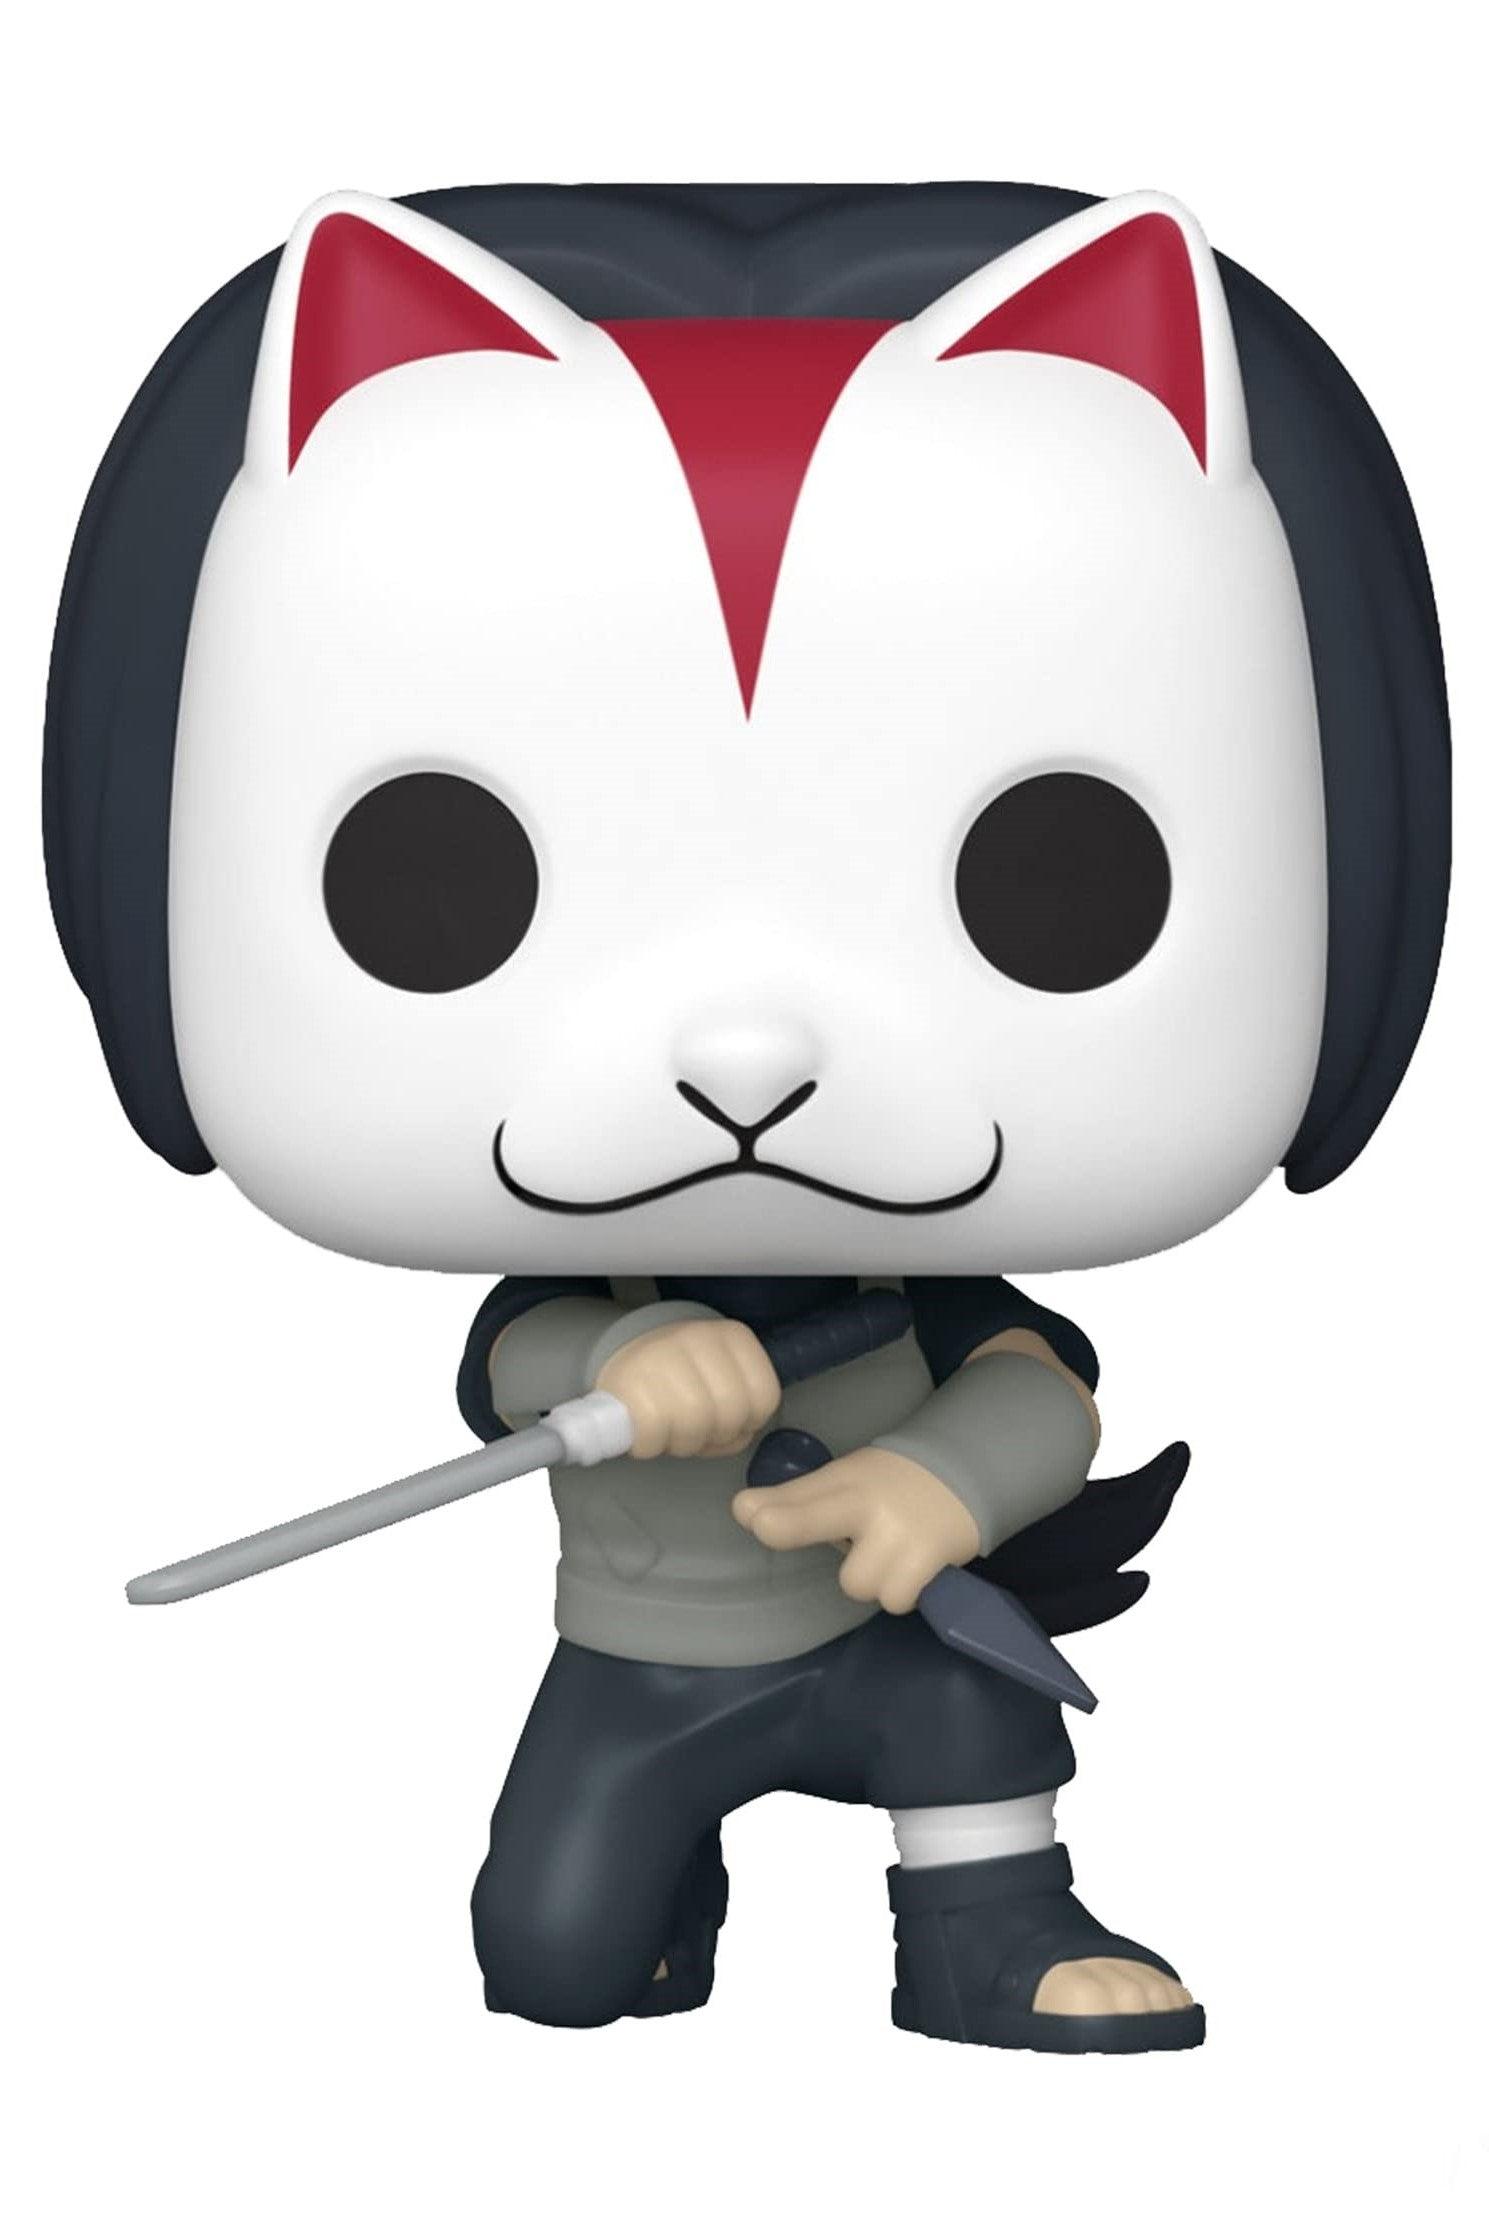 Pop! Animation - Naruto - Anbu Itachi - #1027 - LIMITED CHASE Edition & SPECIAL Edition - Hobby Champion Inc